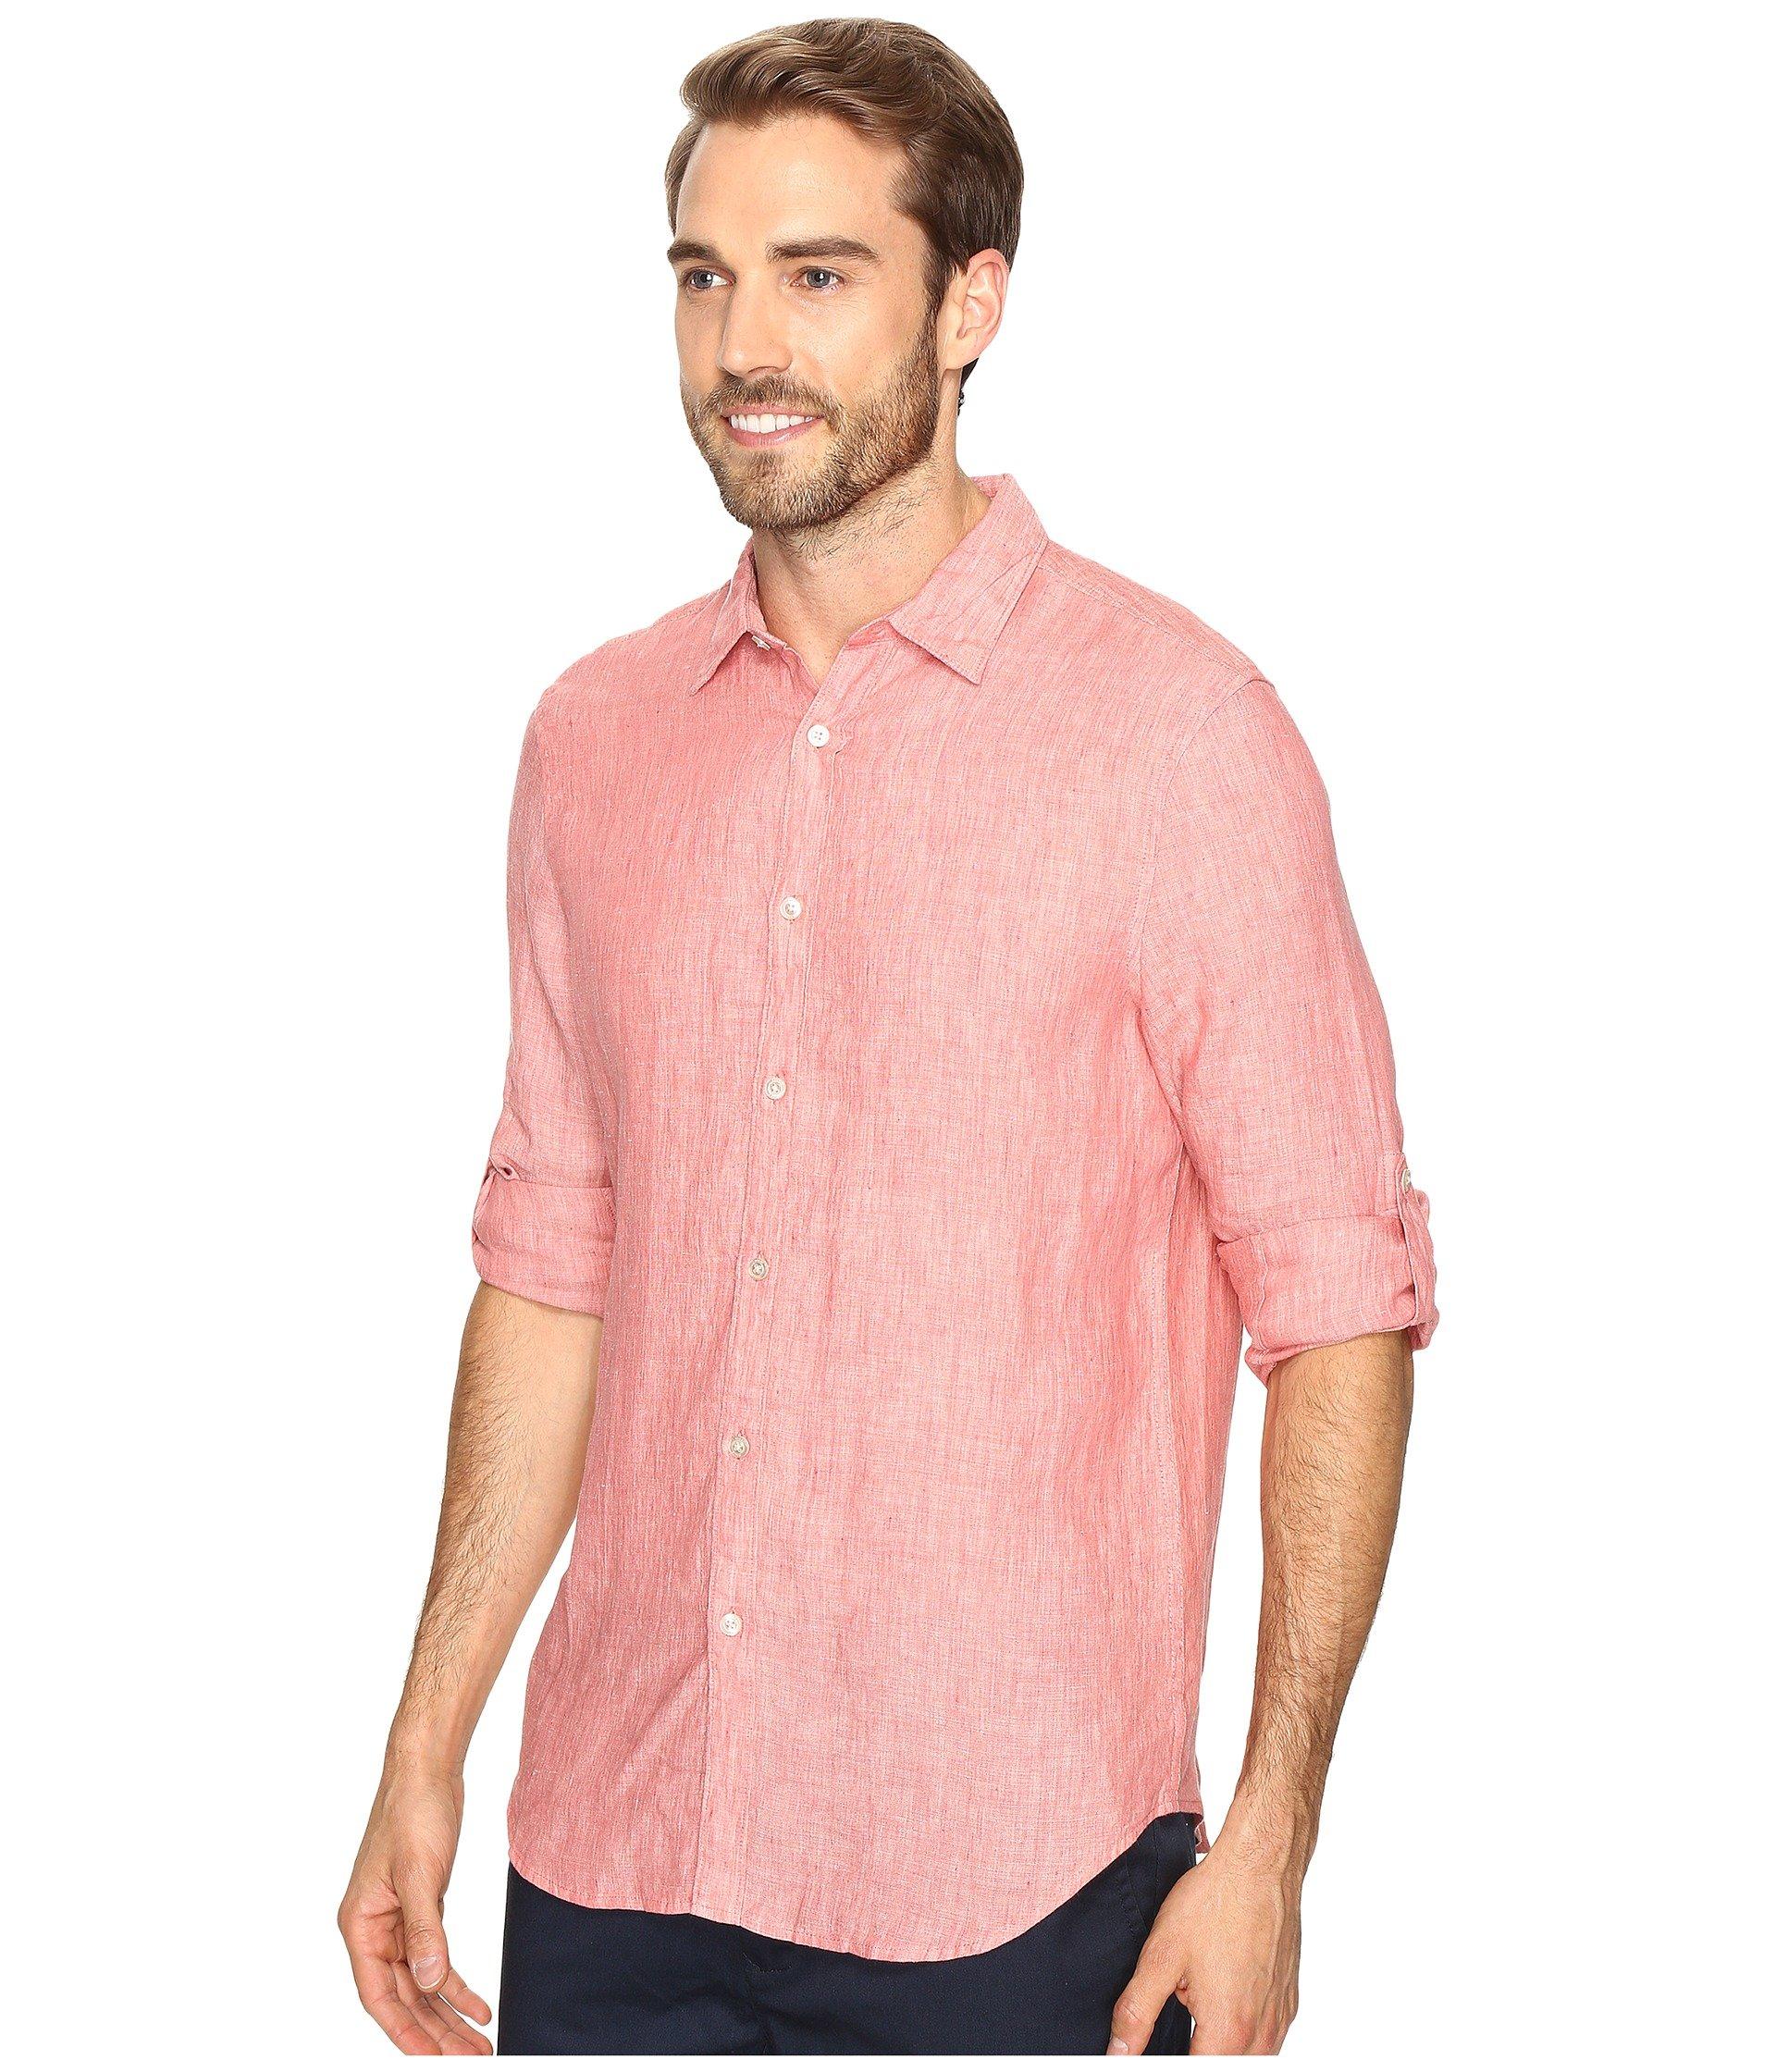 Perry Ellis Rolled Sleeve Solid Linen Shirt in Red for Men - Lyst